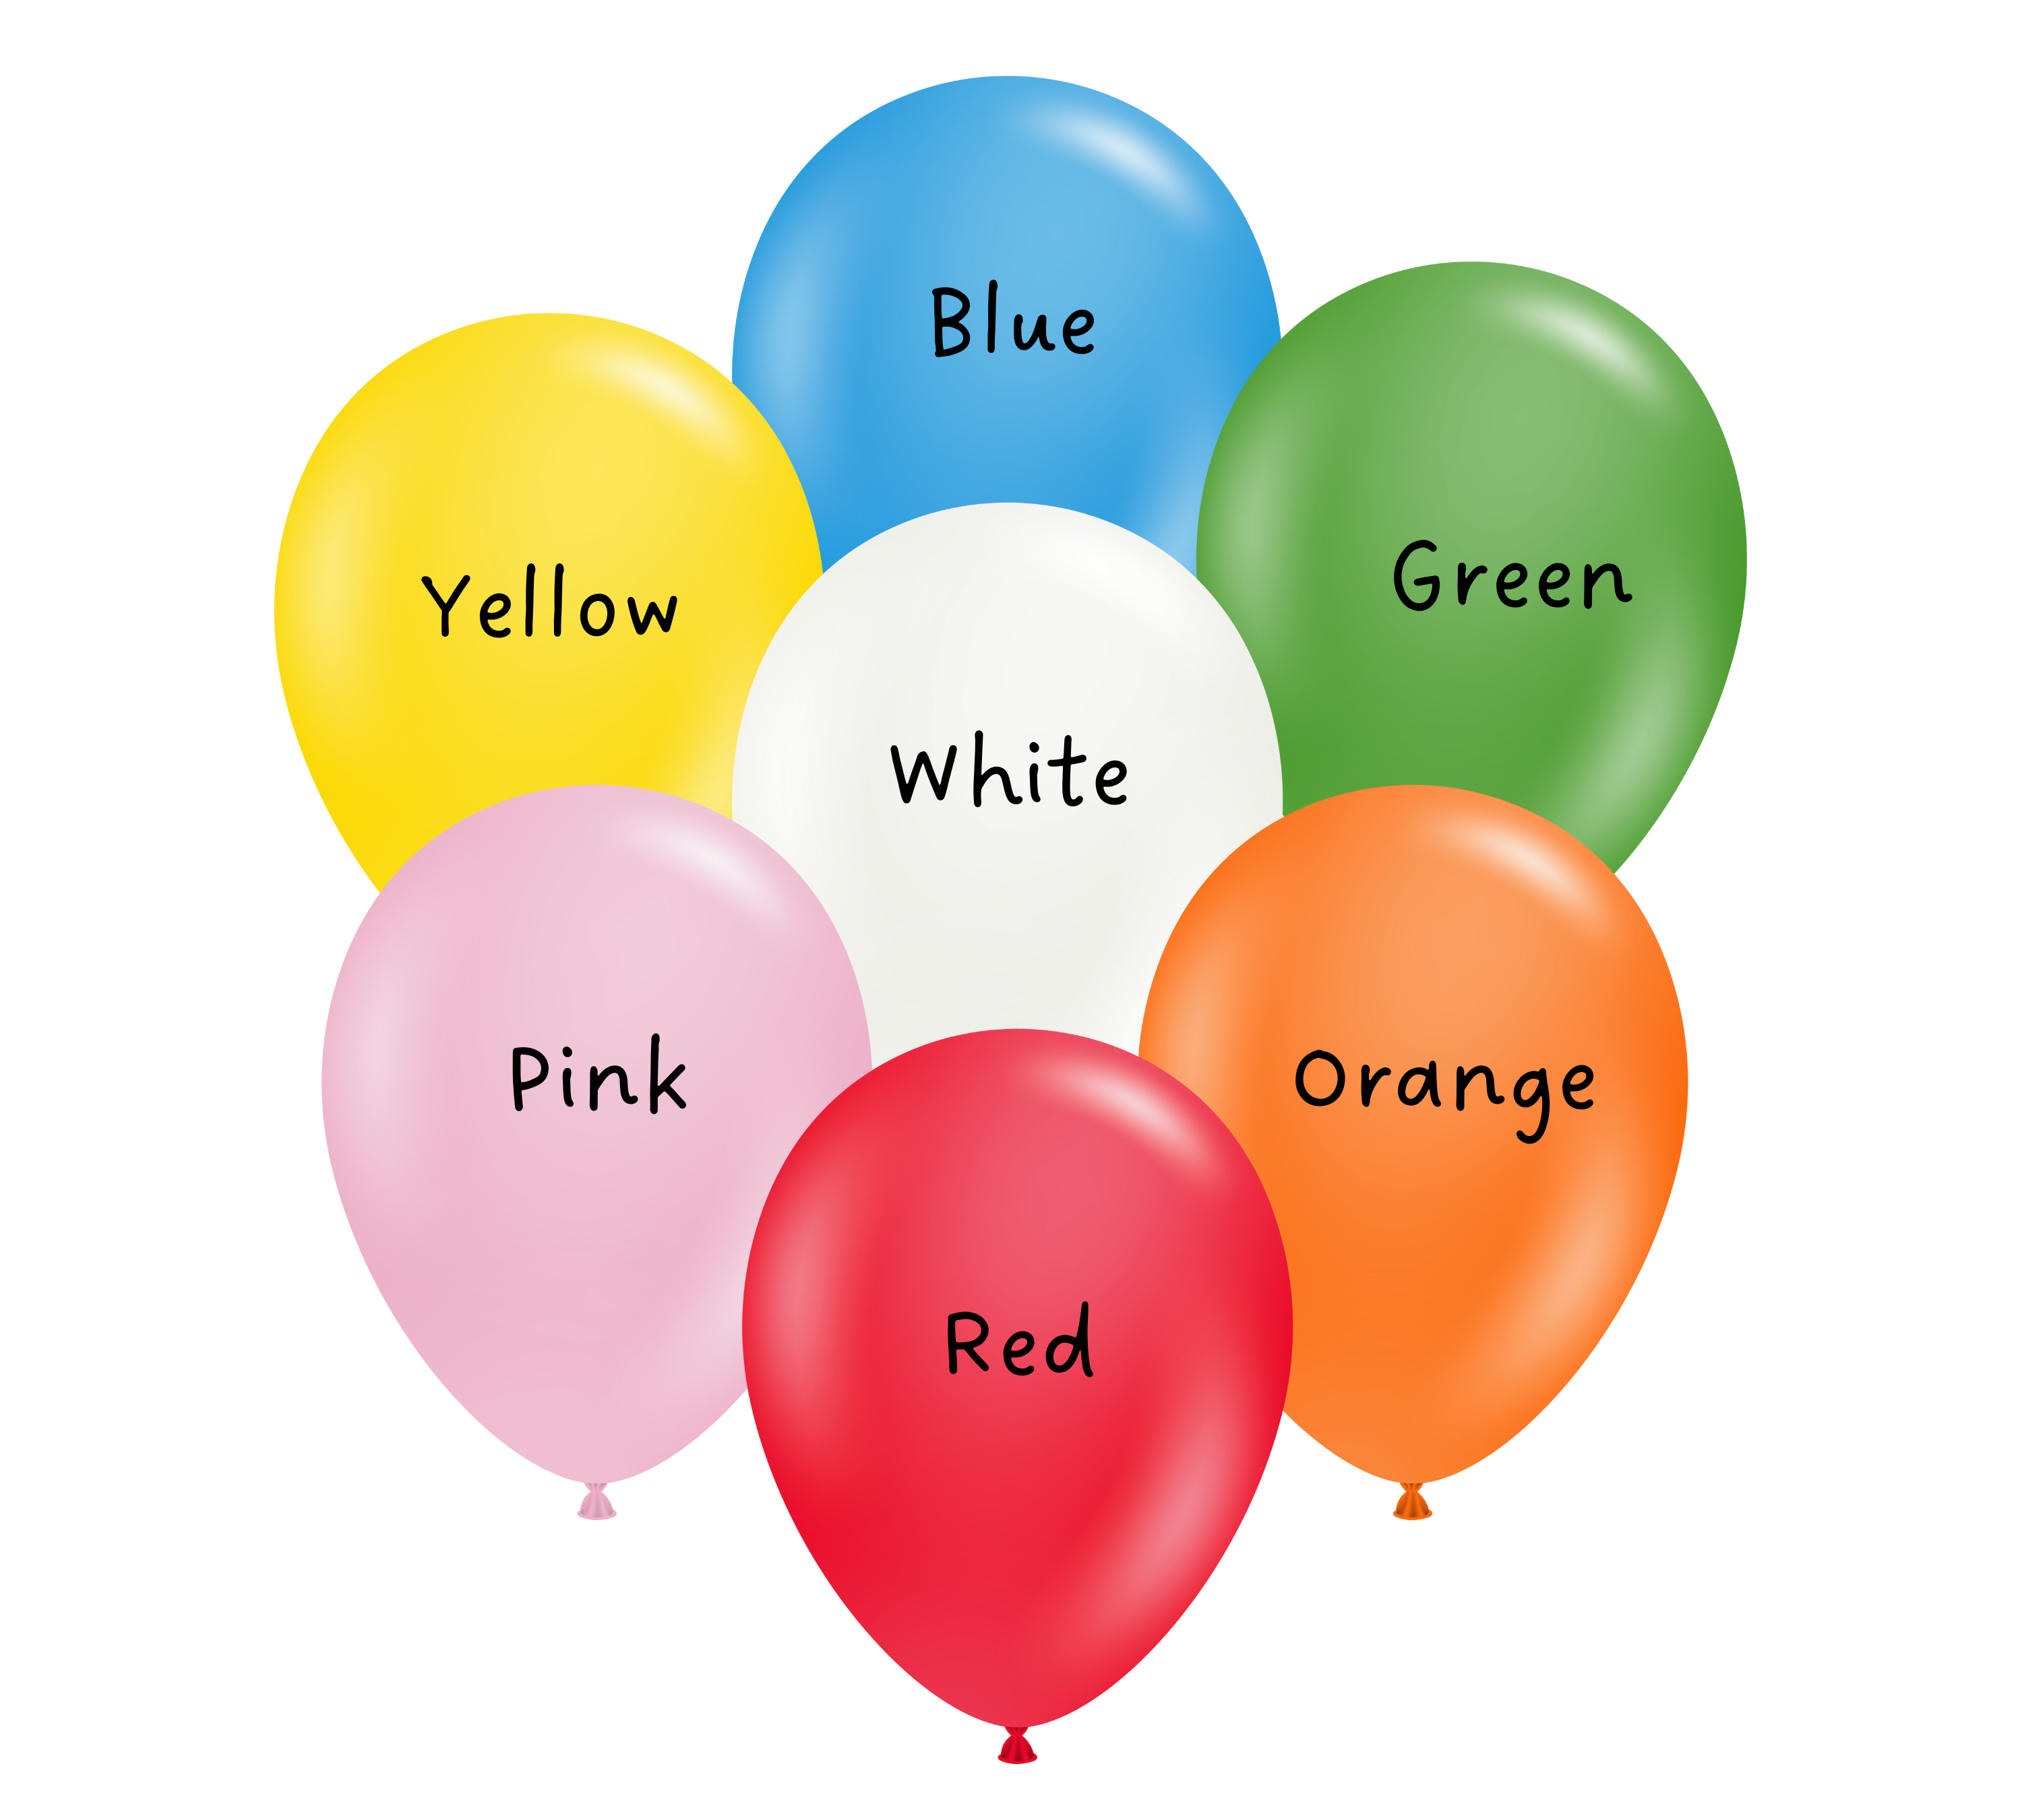 5" TUFTEX Standard Assortment With White Latex Balloons | 50 Count